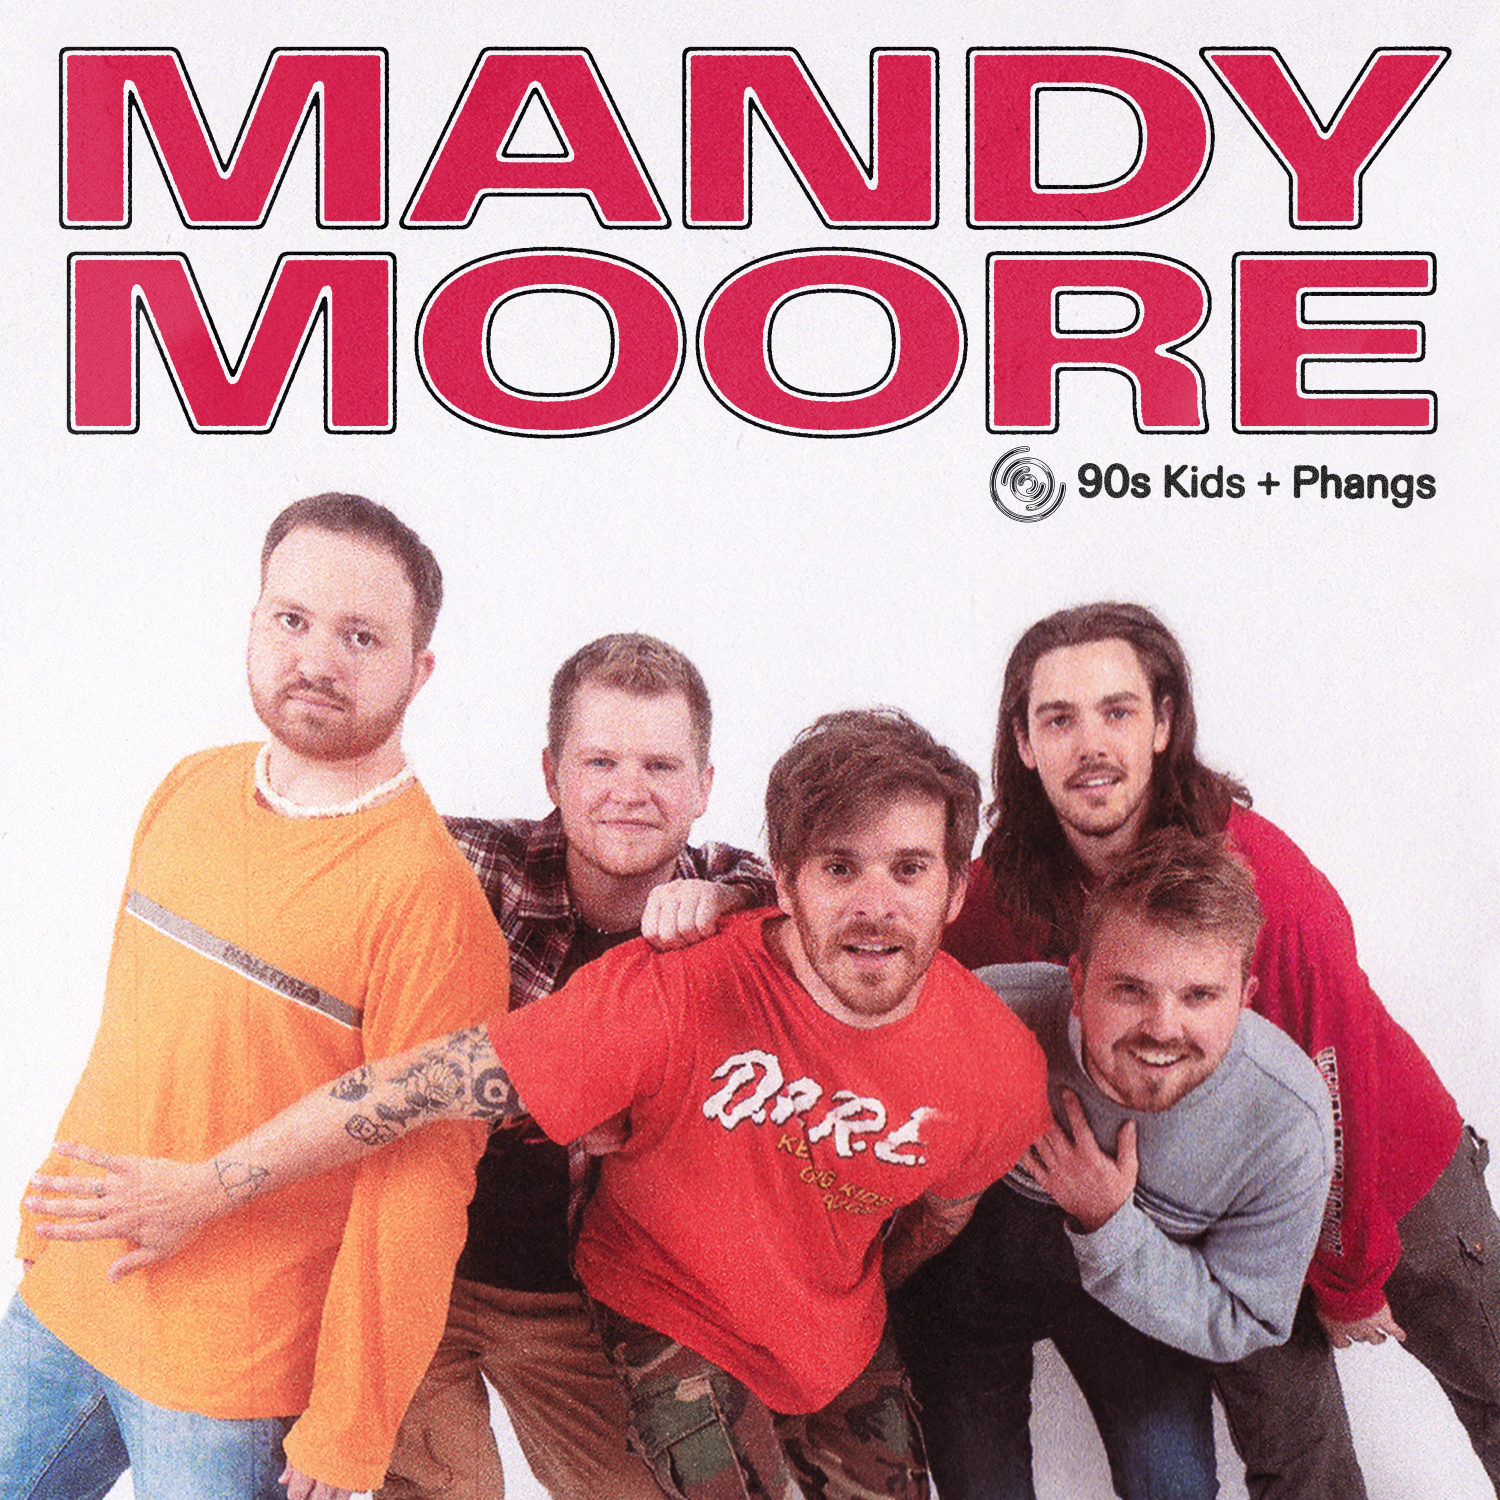 Mandy Moore by 90s Kids Album Cover